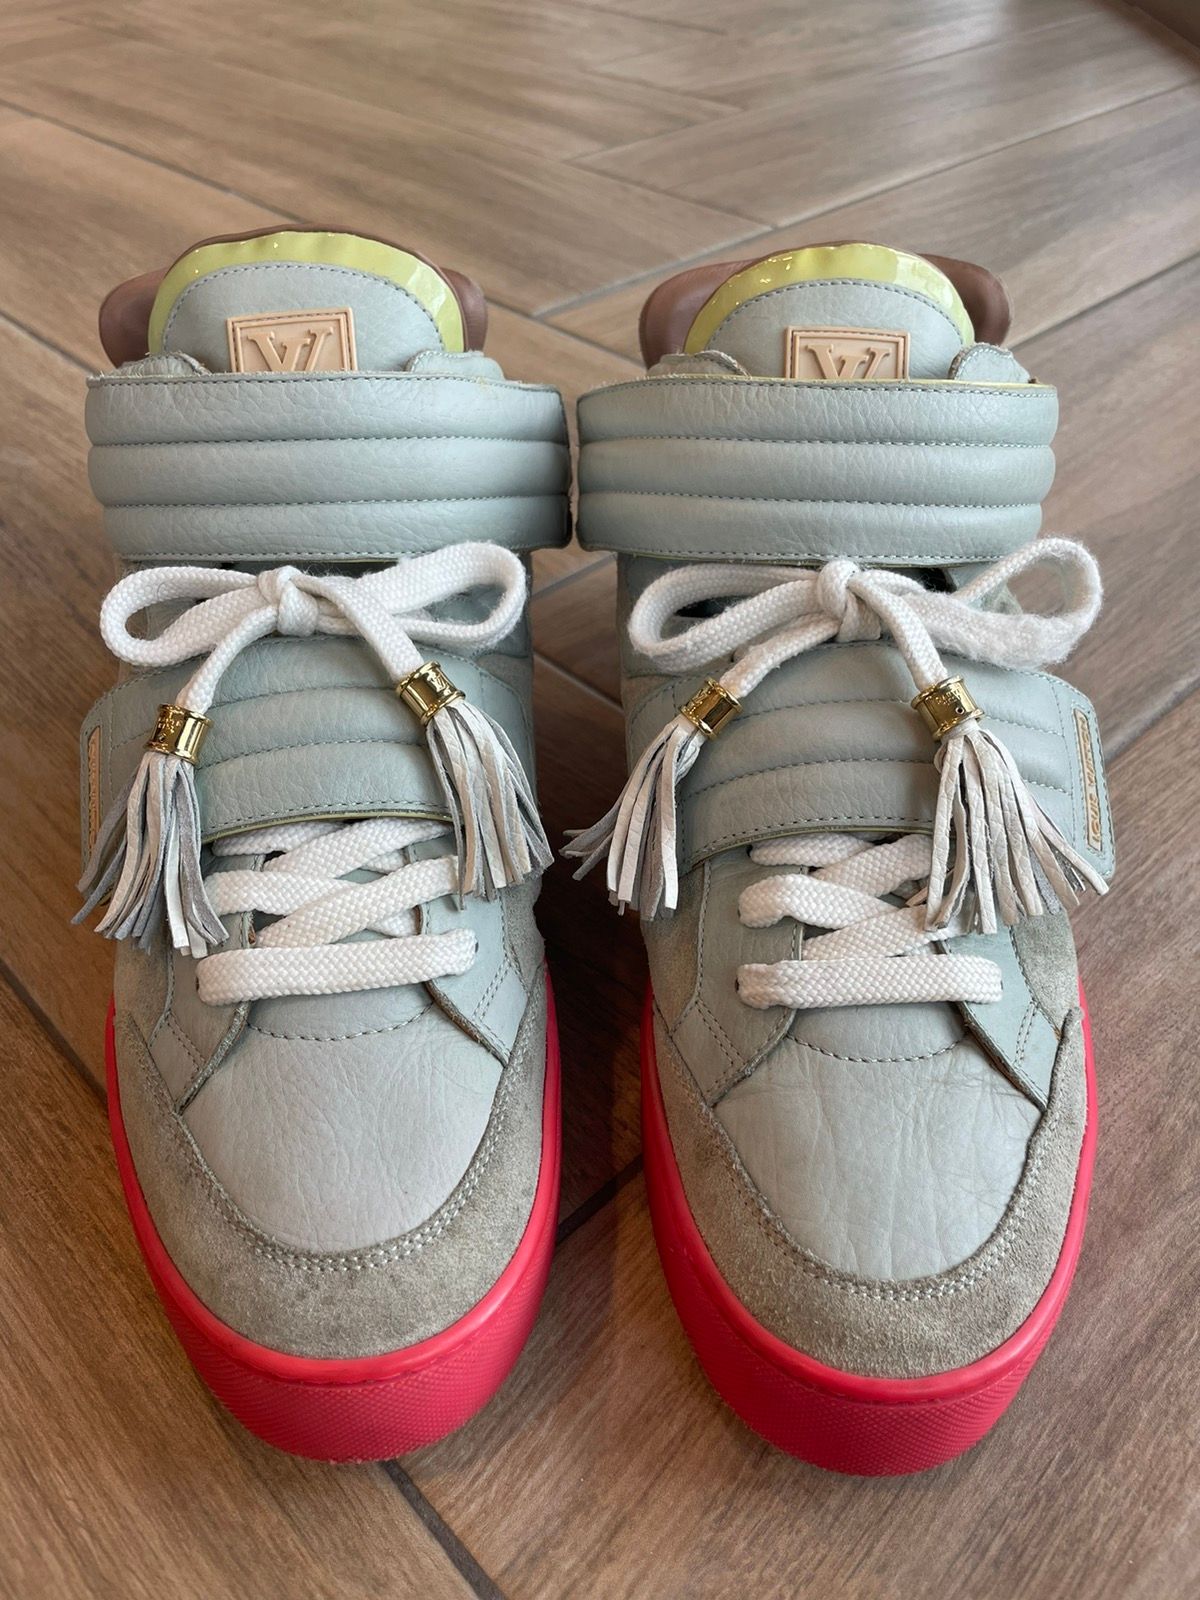 Louis Vuitton Kanye West Jaspers Patchwork Review 